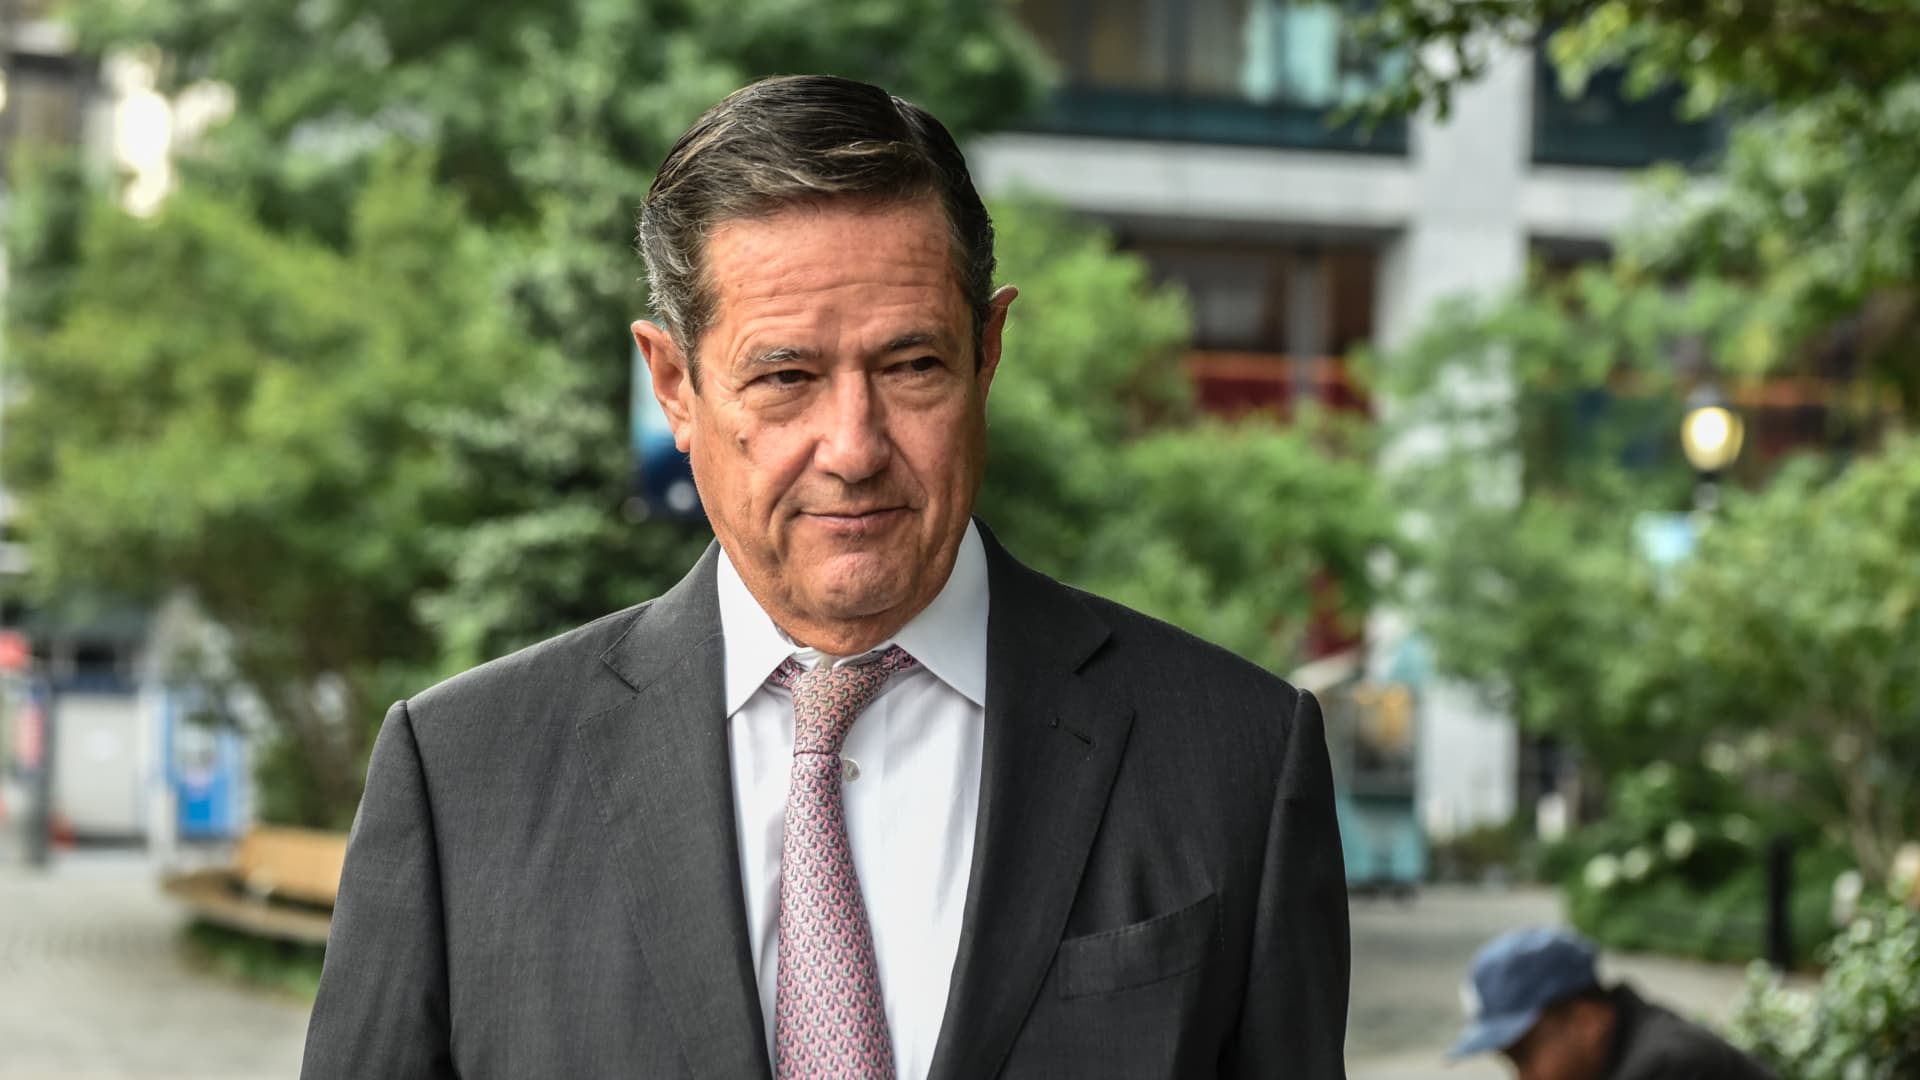 Jes Staley, former CEO of Barclays, arrives at the offices of Boies Schiller Flexner LLP in New York on June 11, 2023.